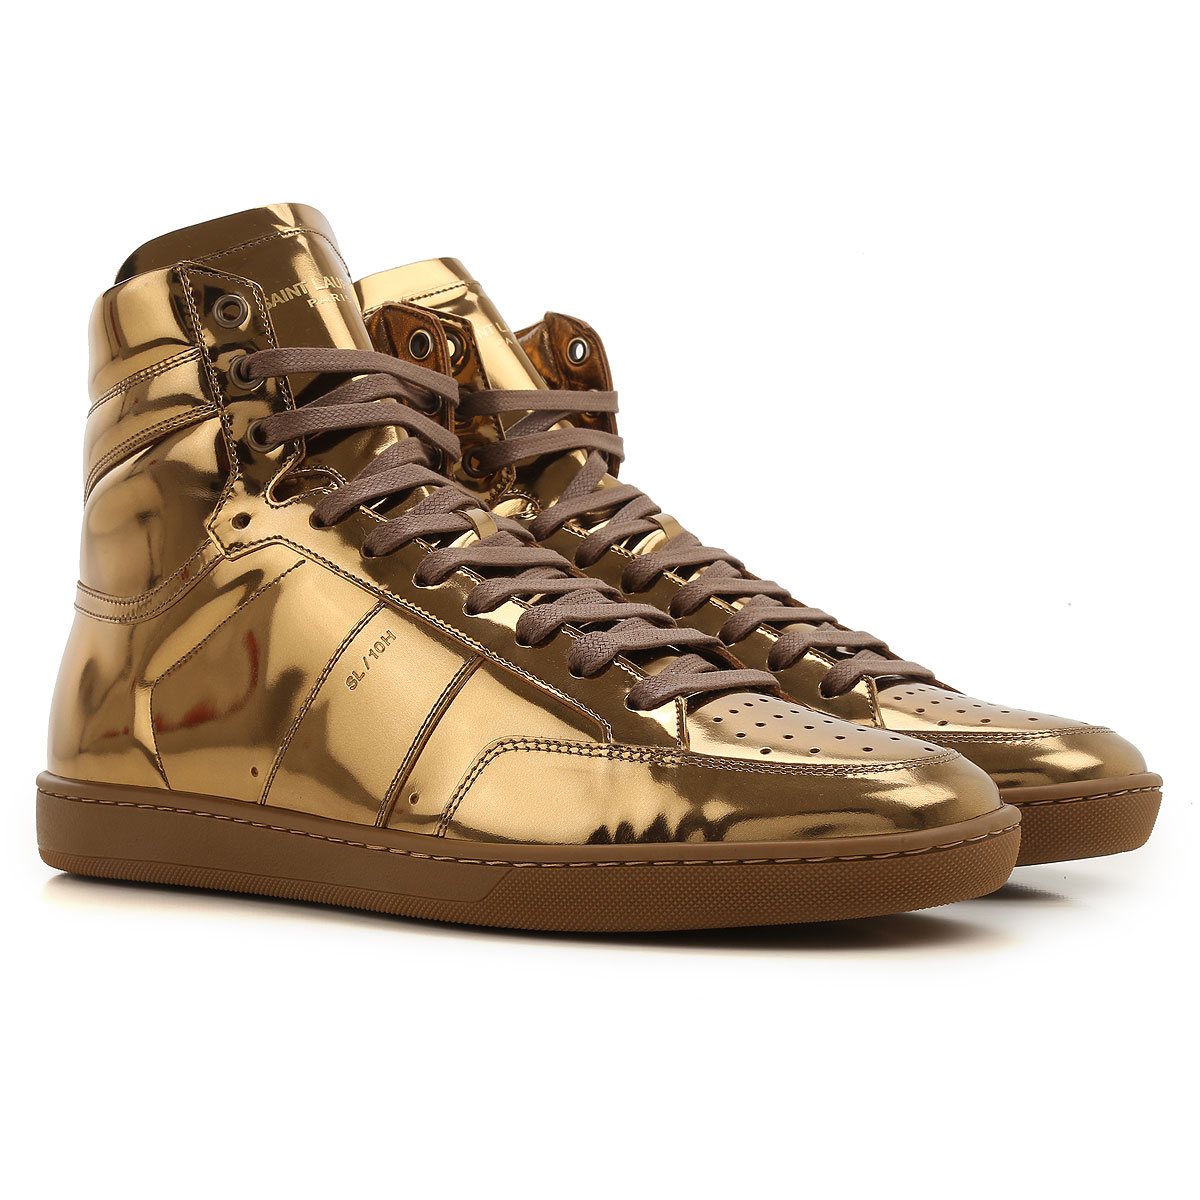 Mens Shoes Yves Saint Laurent, Style code: 418026-aal00-8237